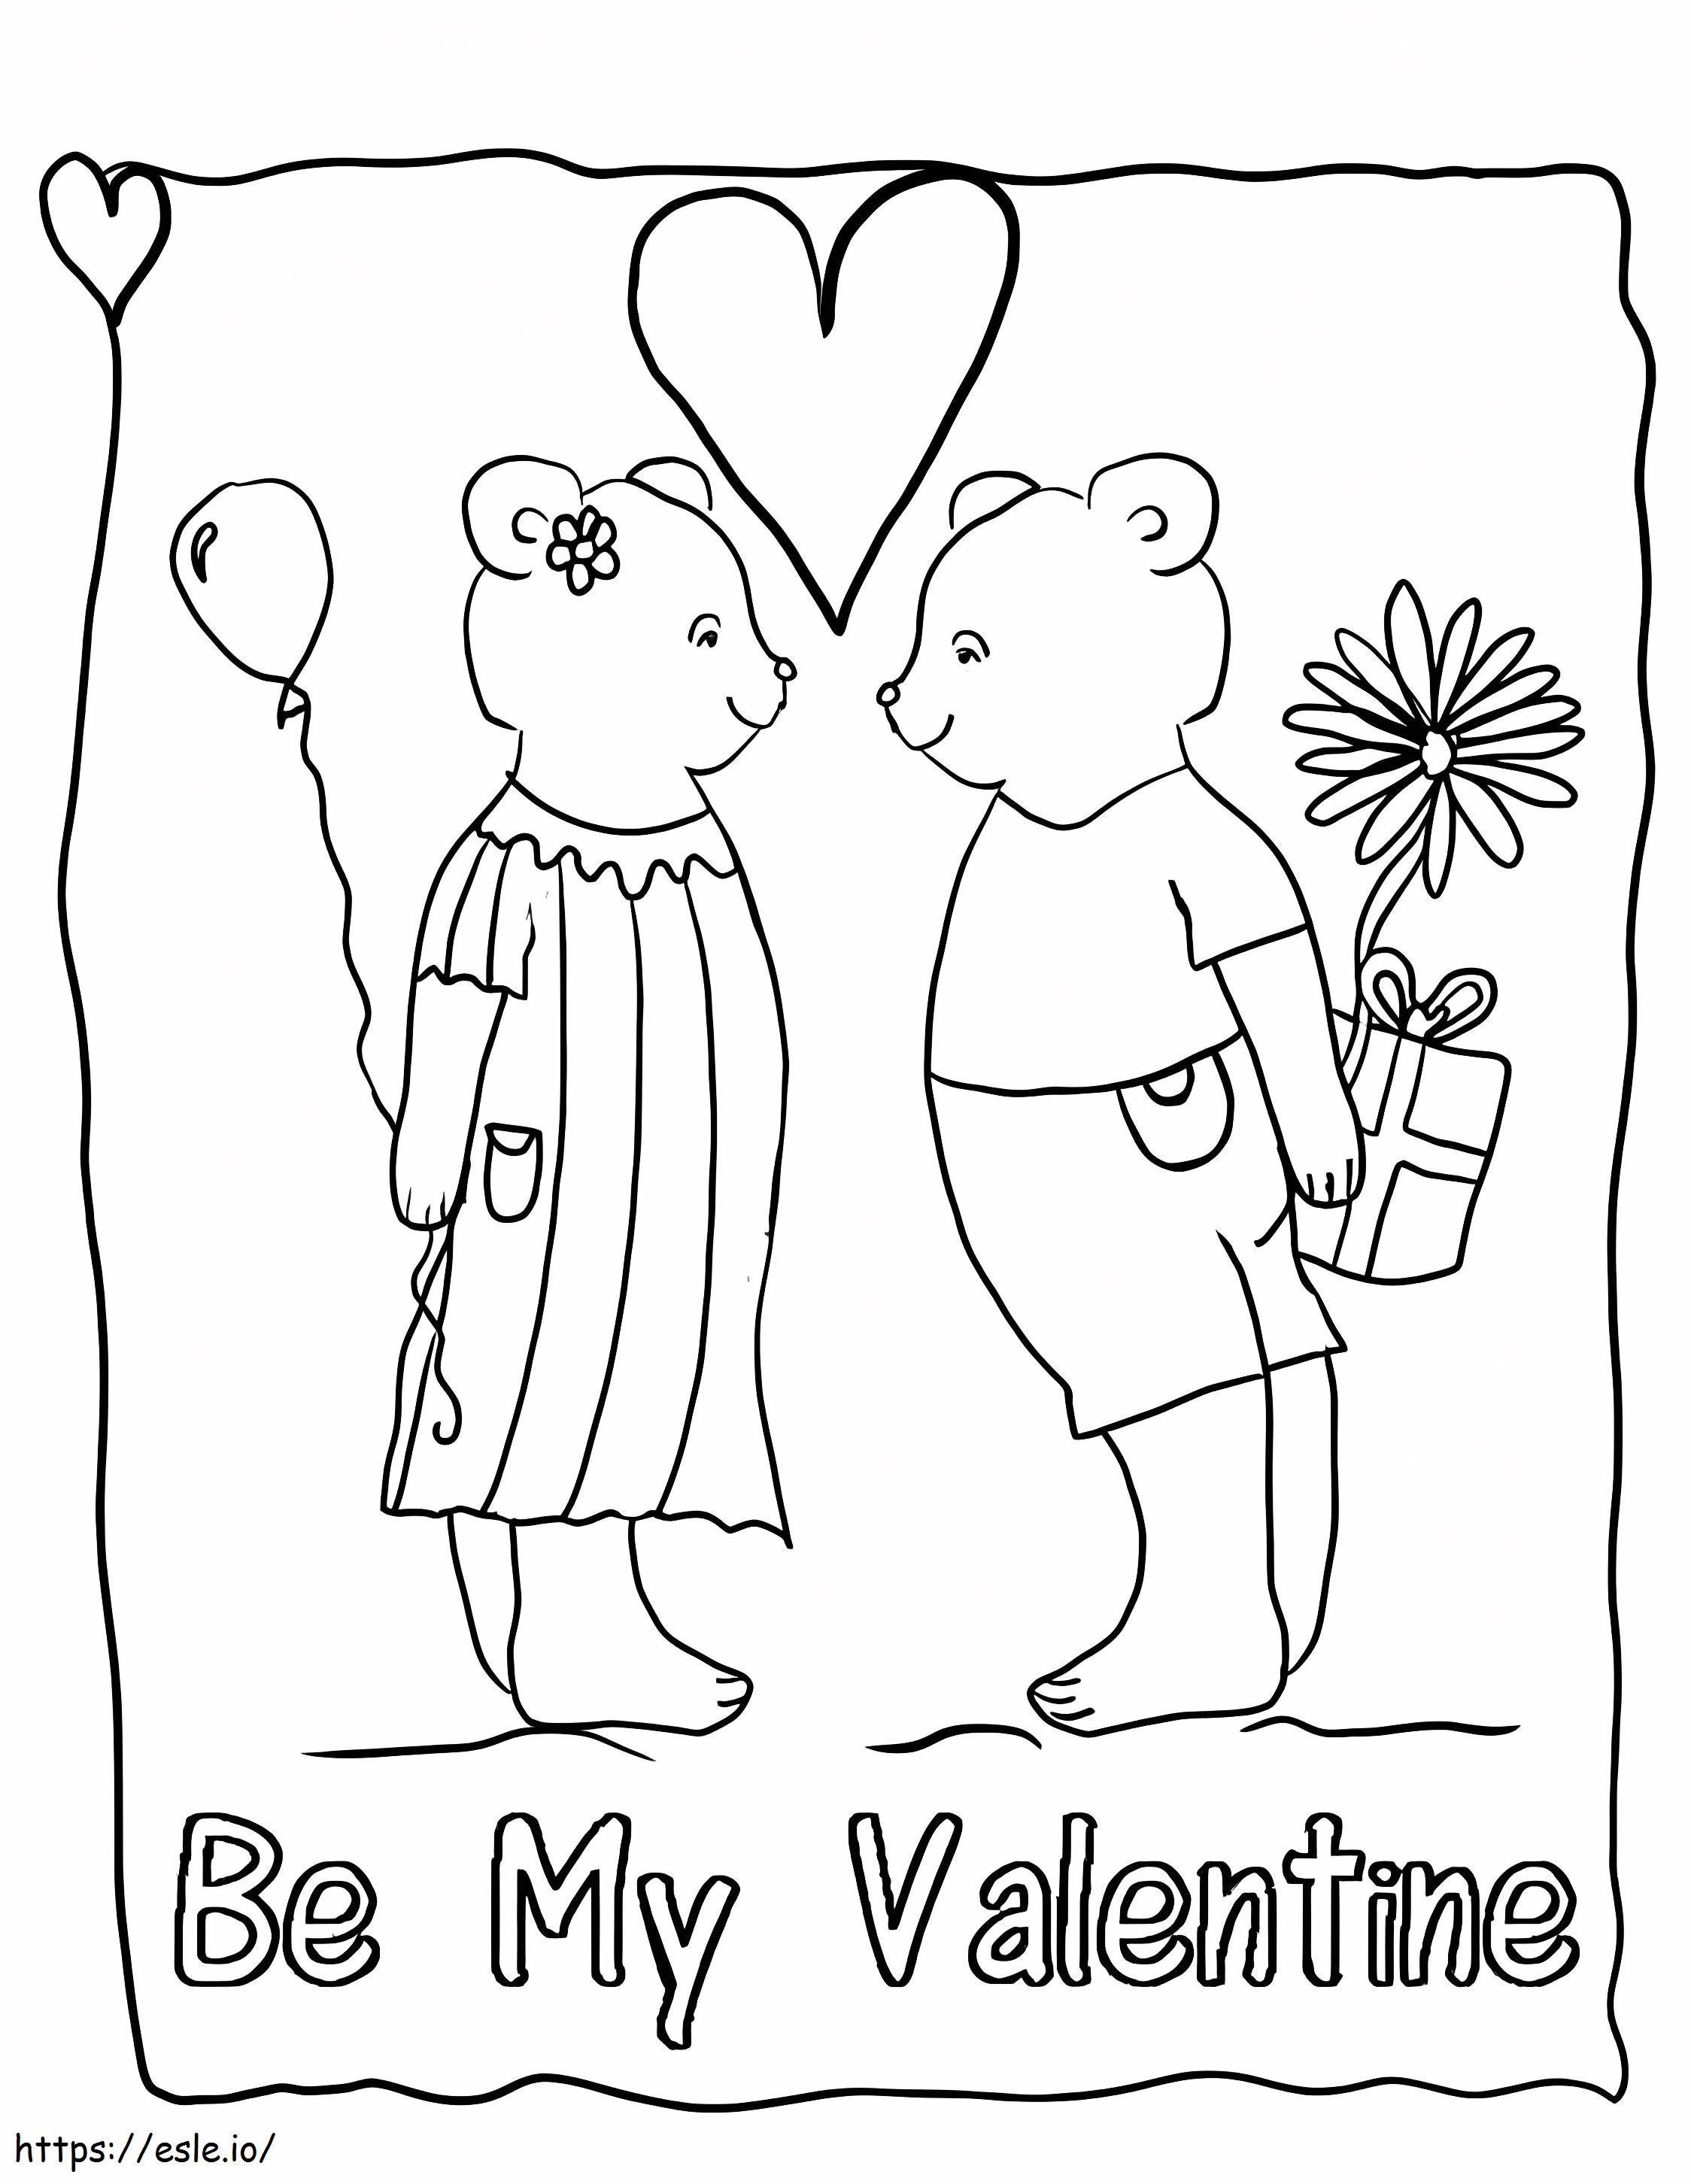 Cute Valentine Card coloring page